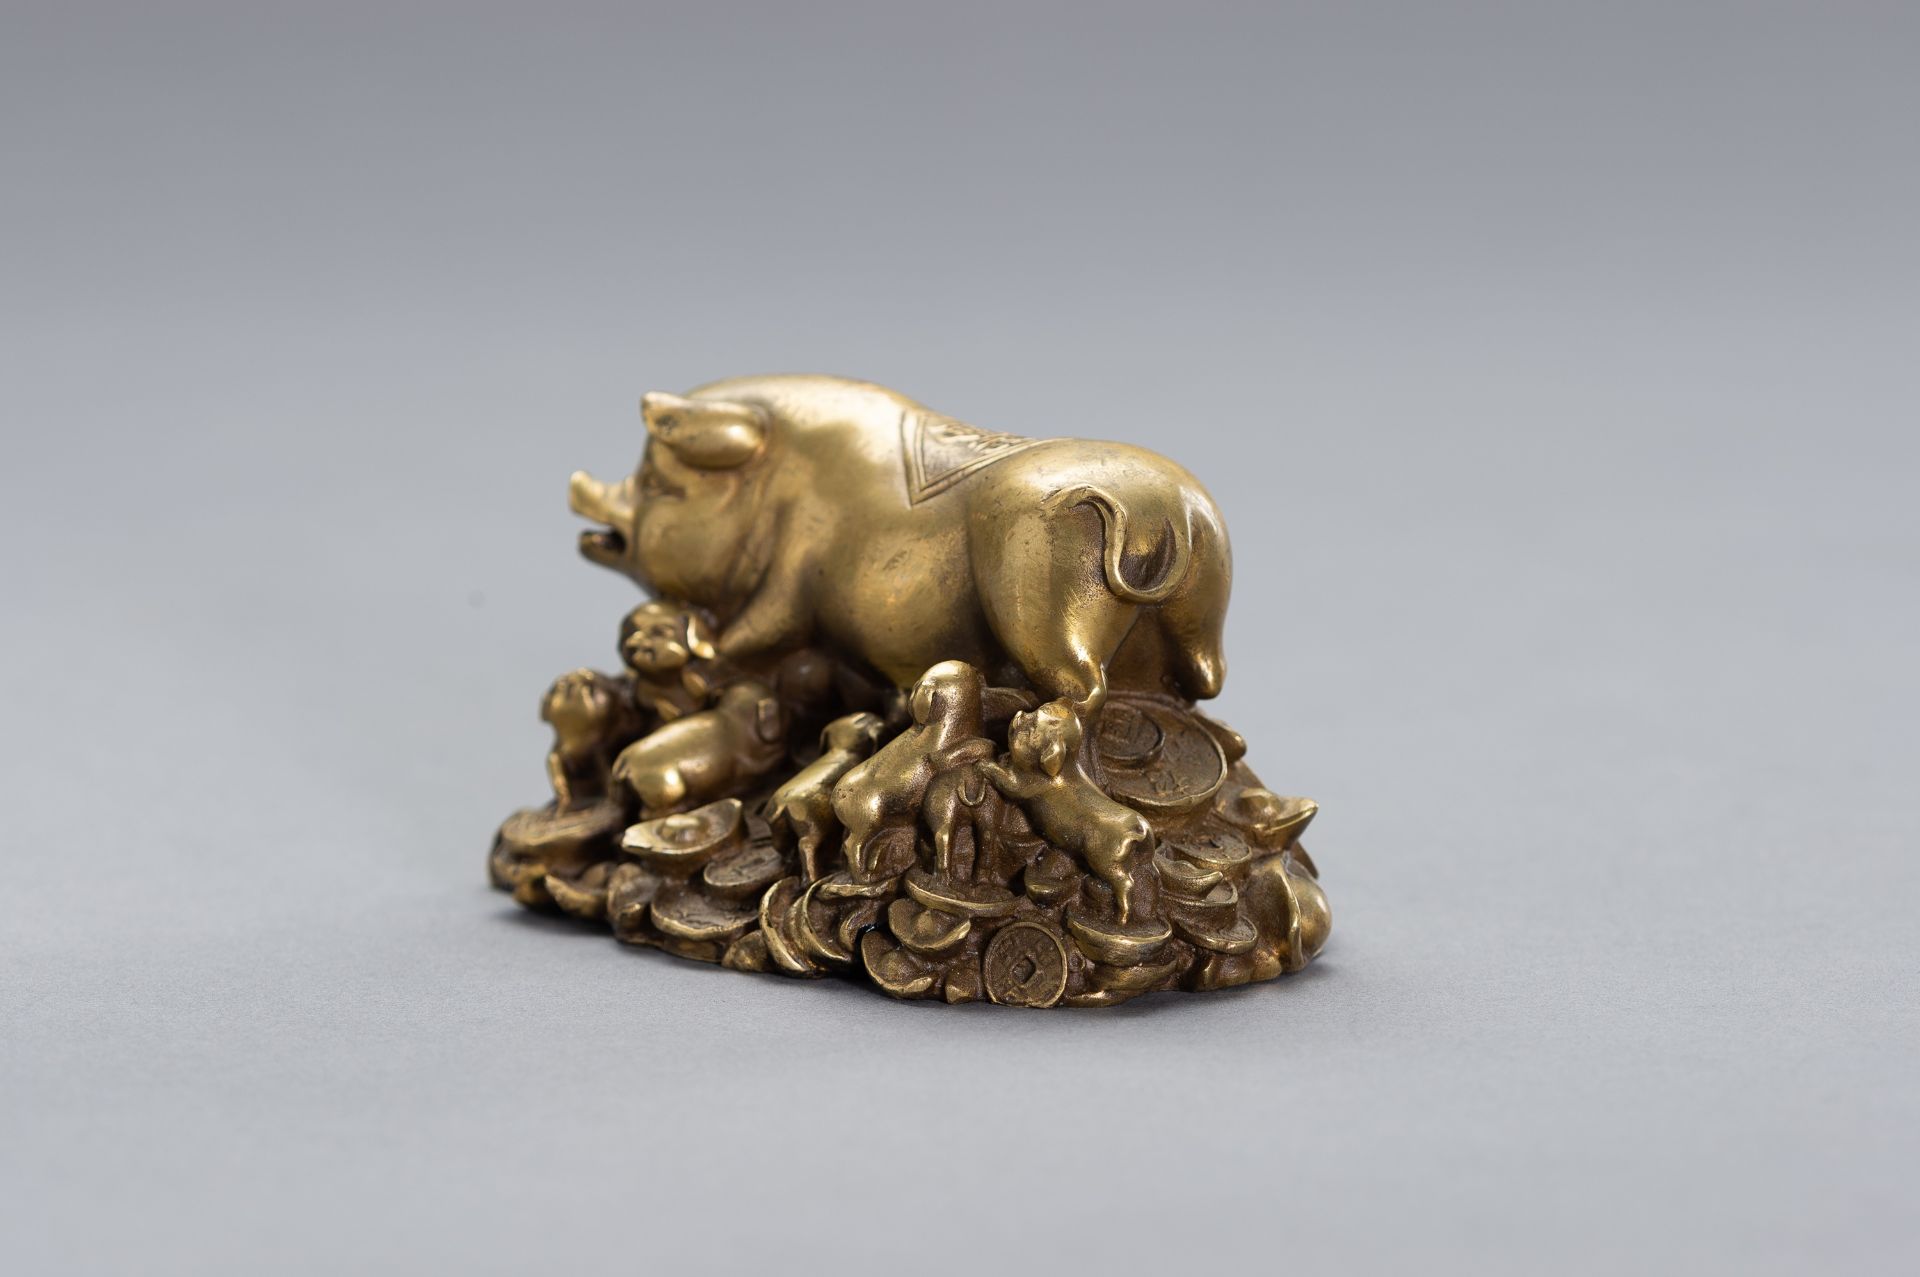 A BRONZE LUCKY CHARM OF A SOW WITH HER YOUNG - Image 5 of 10